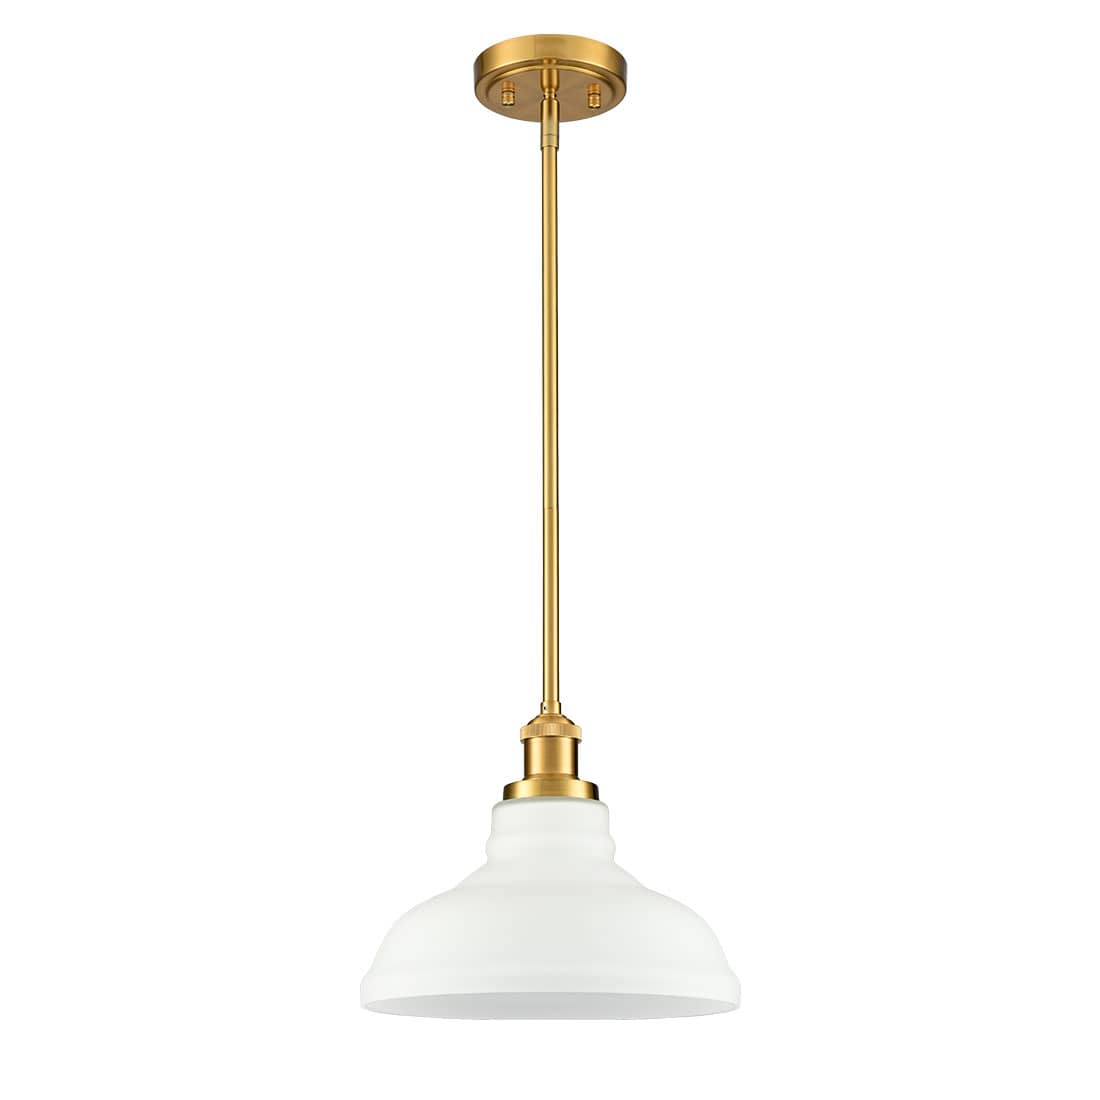 Modern Gold Pendant Light Fixture Kitchen Island with Dome Opal Glass